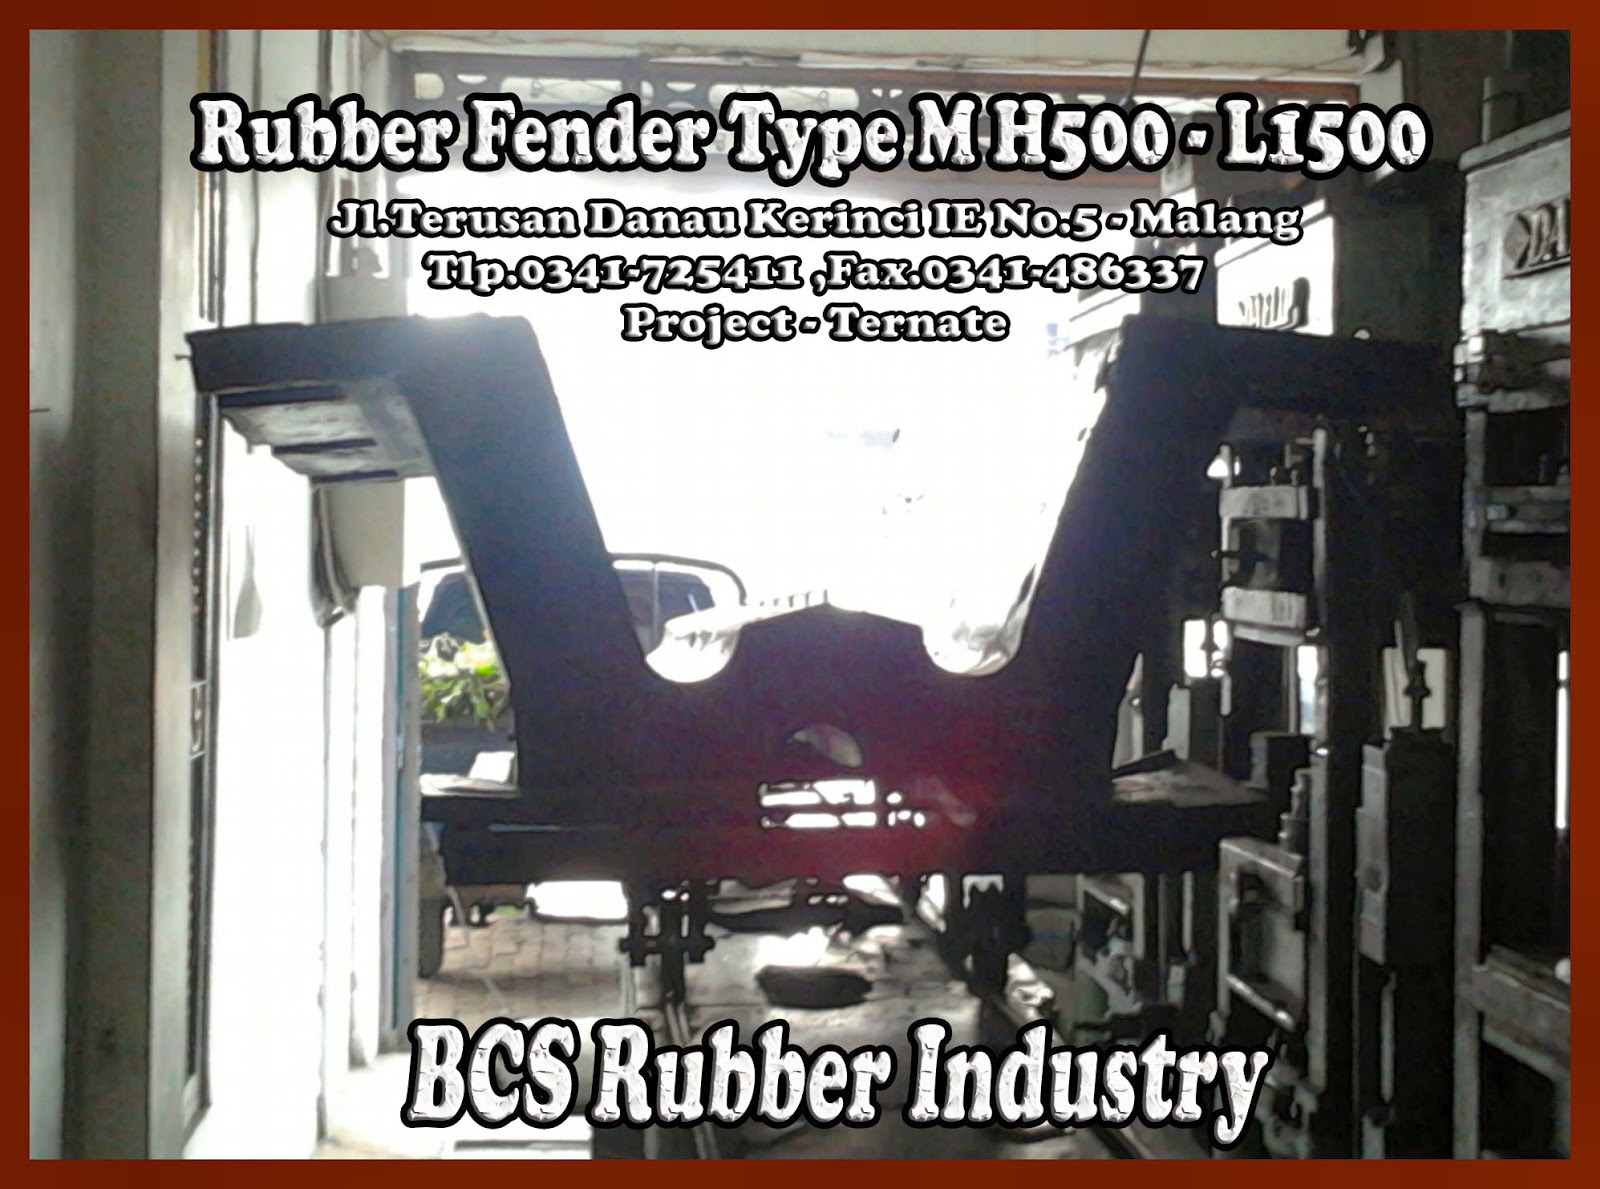 Special Edition Rubber Fender M 500 L 1500